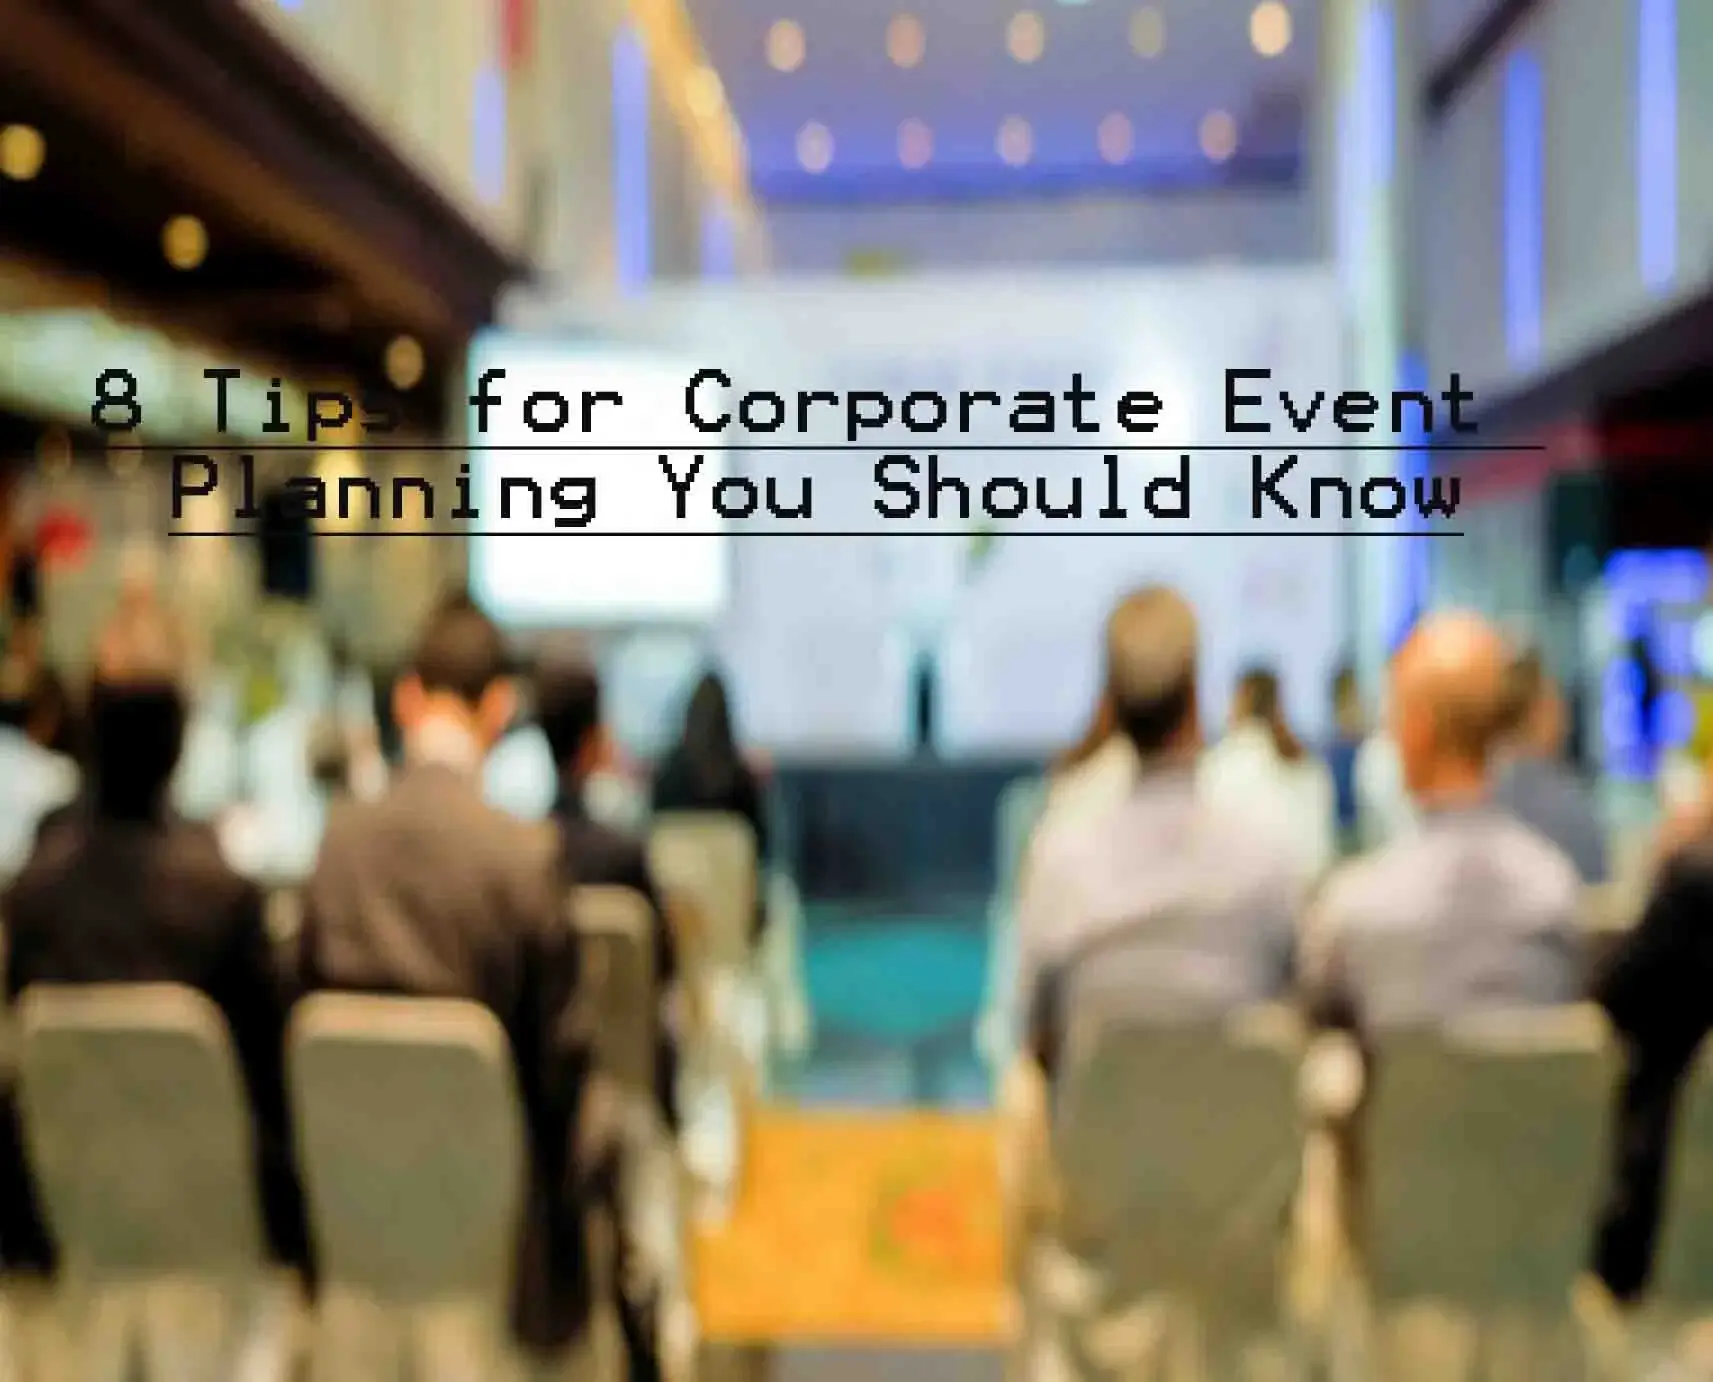 8 Tips for Corporate Event Planning You Should Know